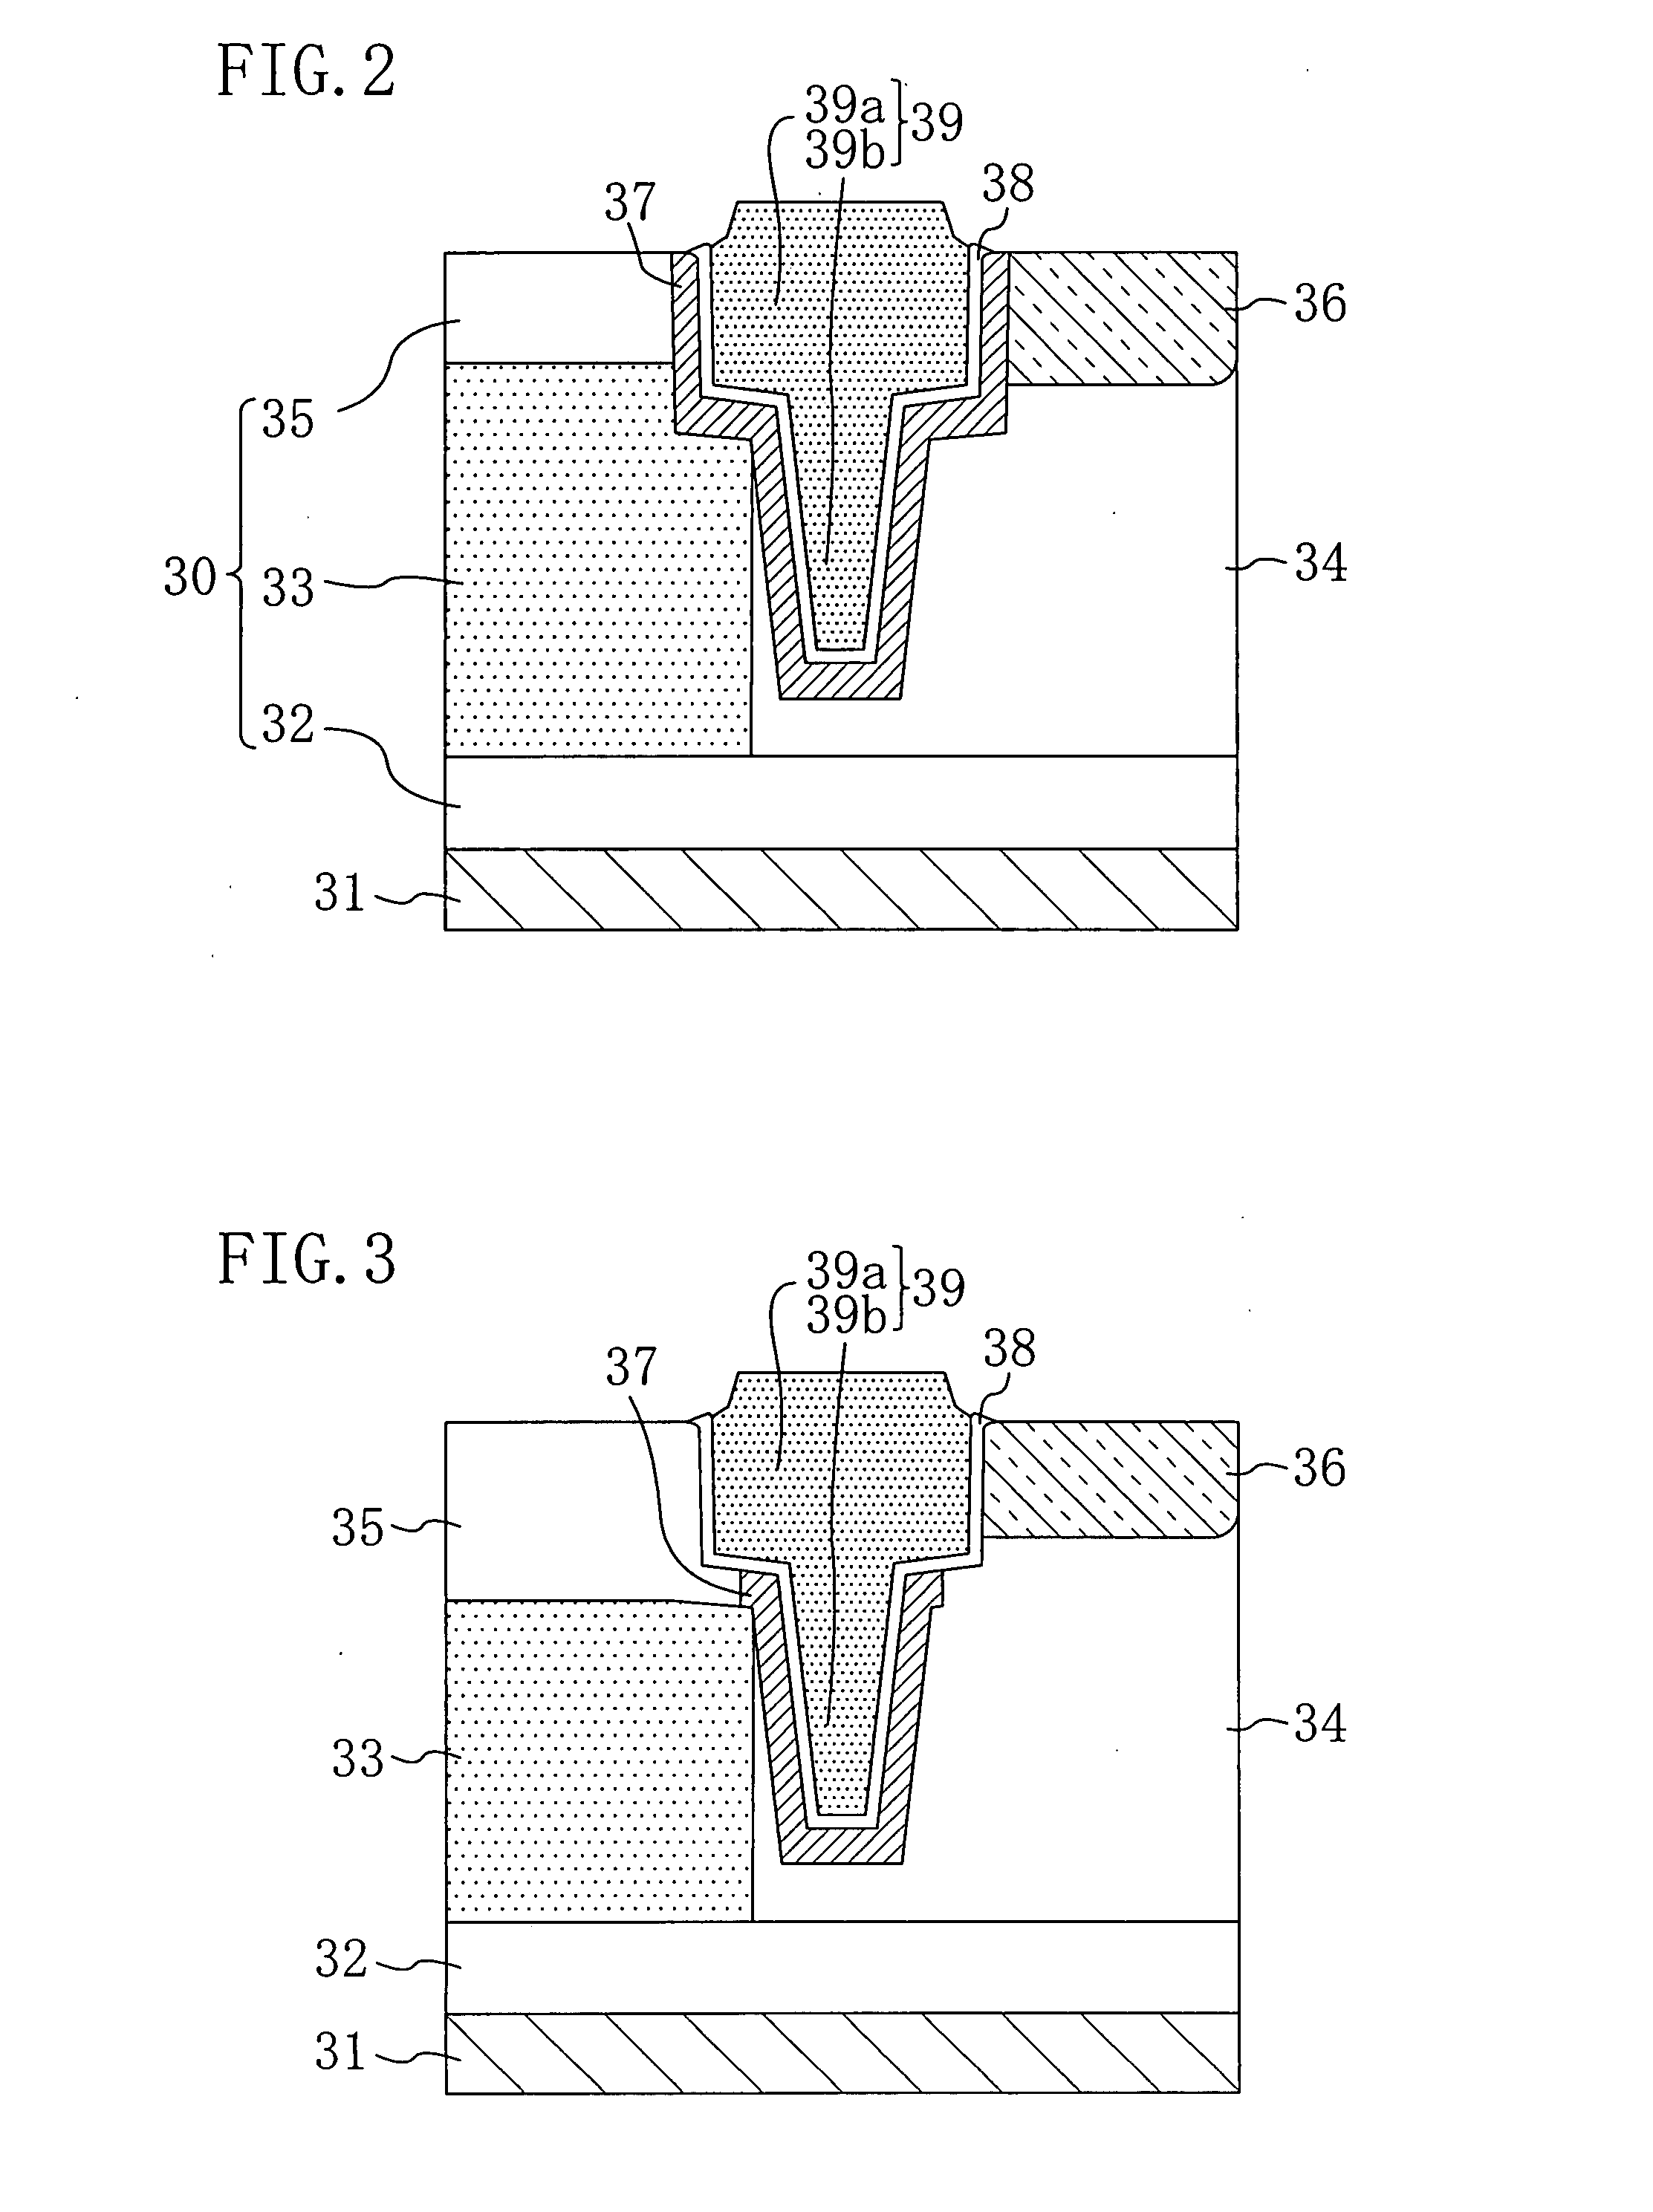 Solid state imaging device, method for fabricating the same, and camera